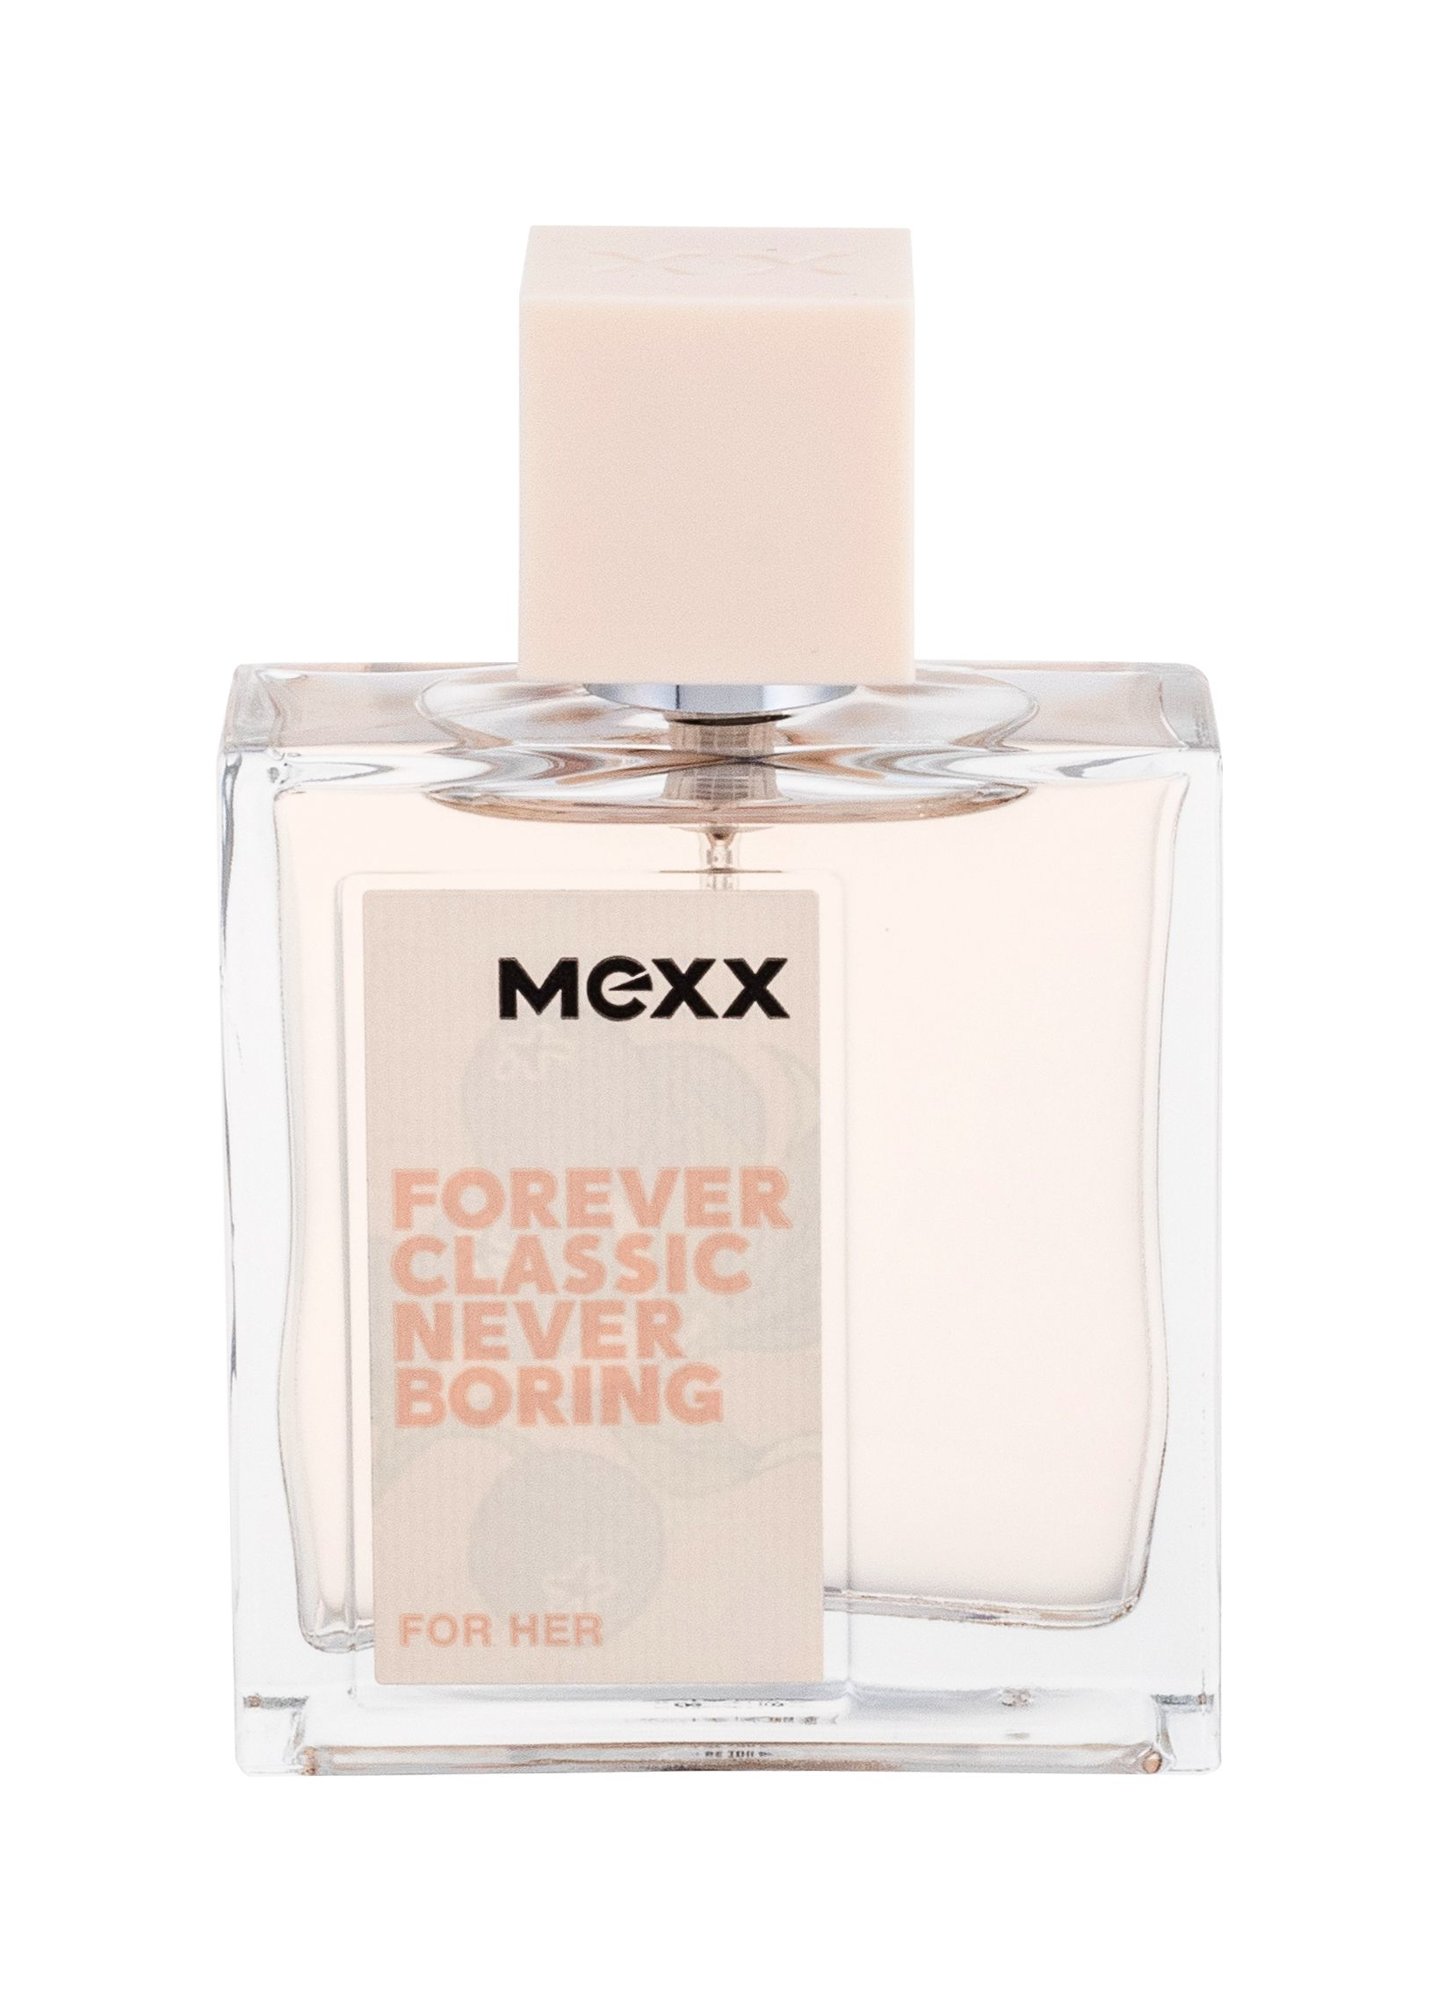 Mexx Forever Classic Never Boring for Her, edt 30ml